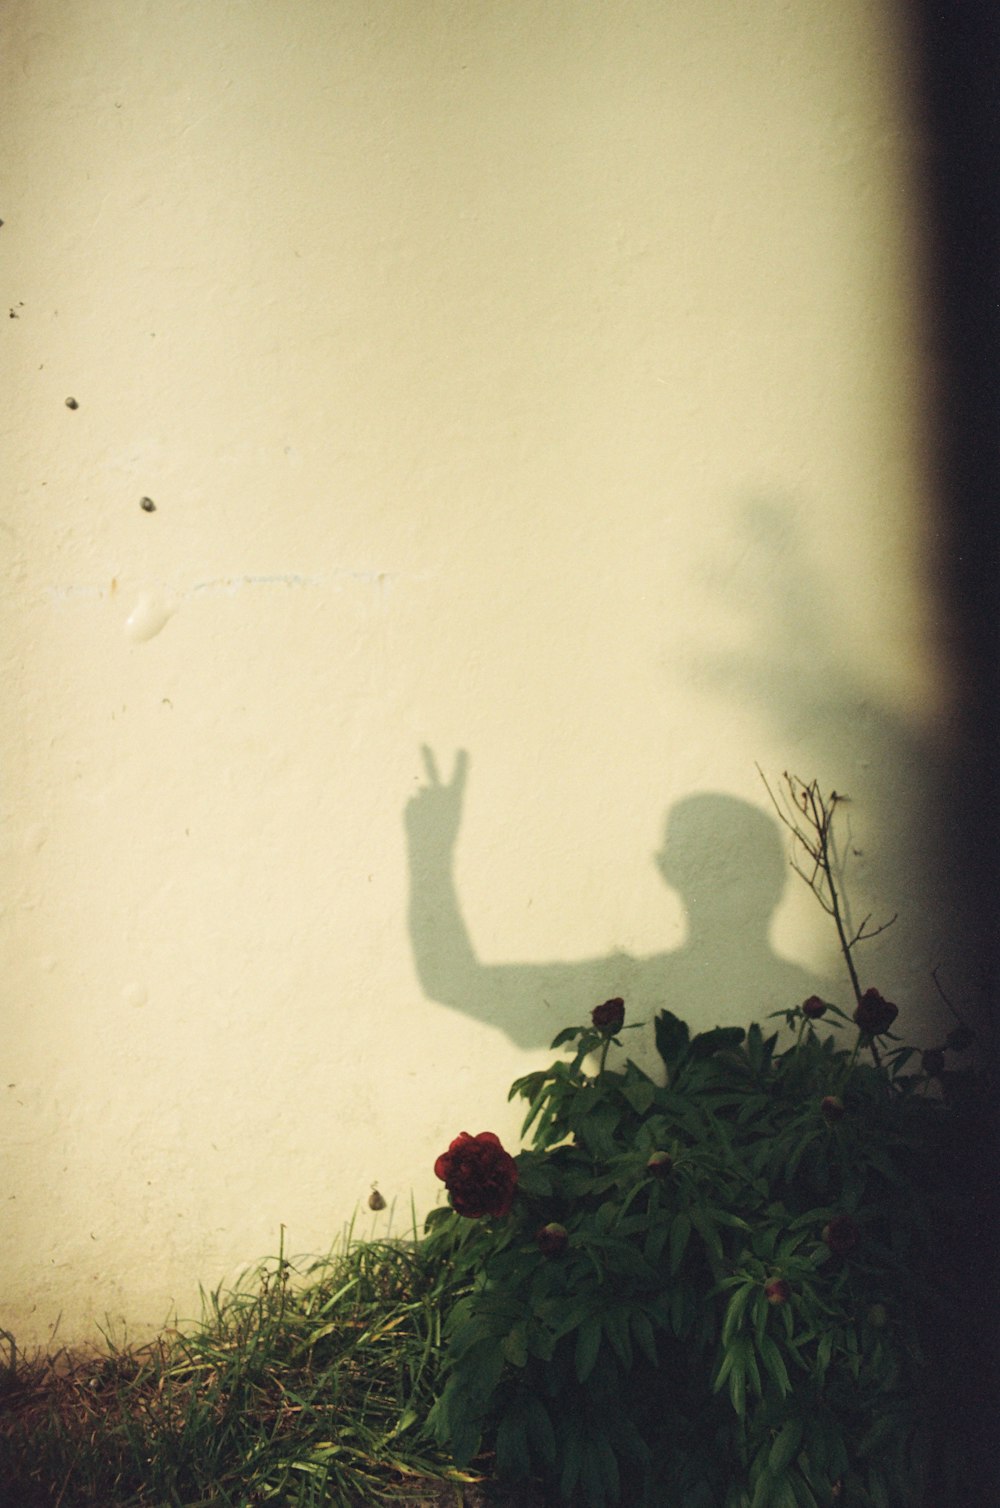 a shadow of a person on a wall